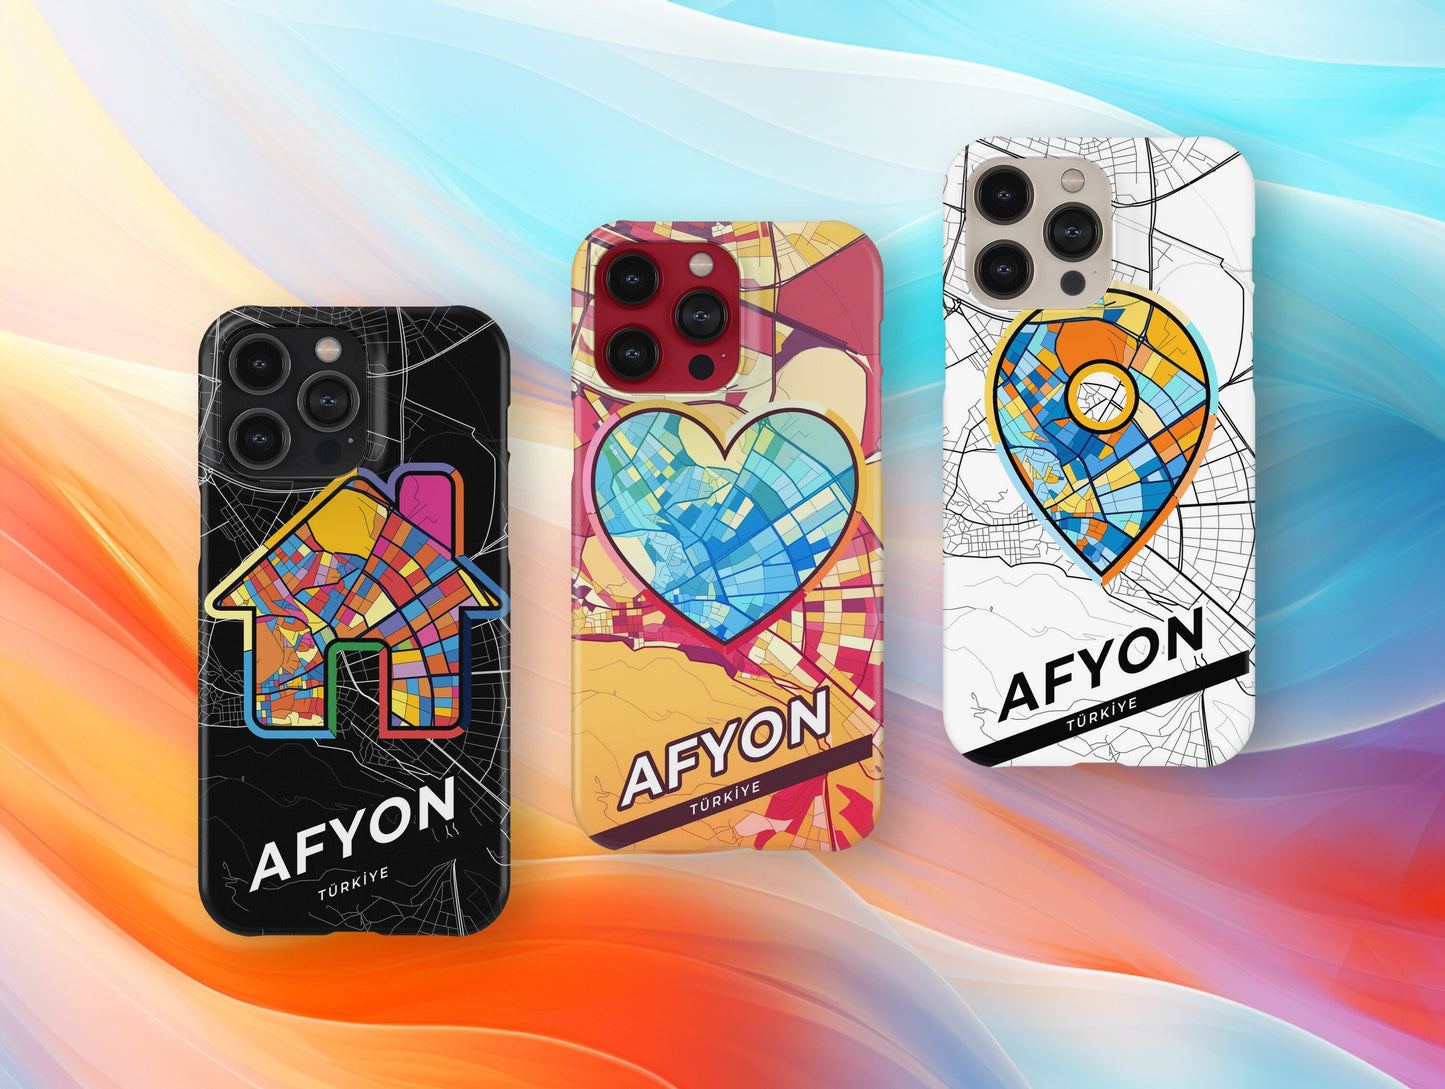 Afyon Turkey slim phone case with colorful icon. Birthday, wedding or housewarming gift. Couple match cases.